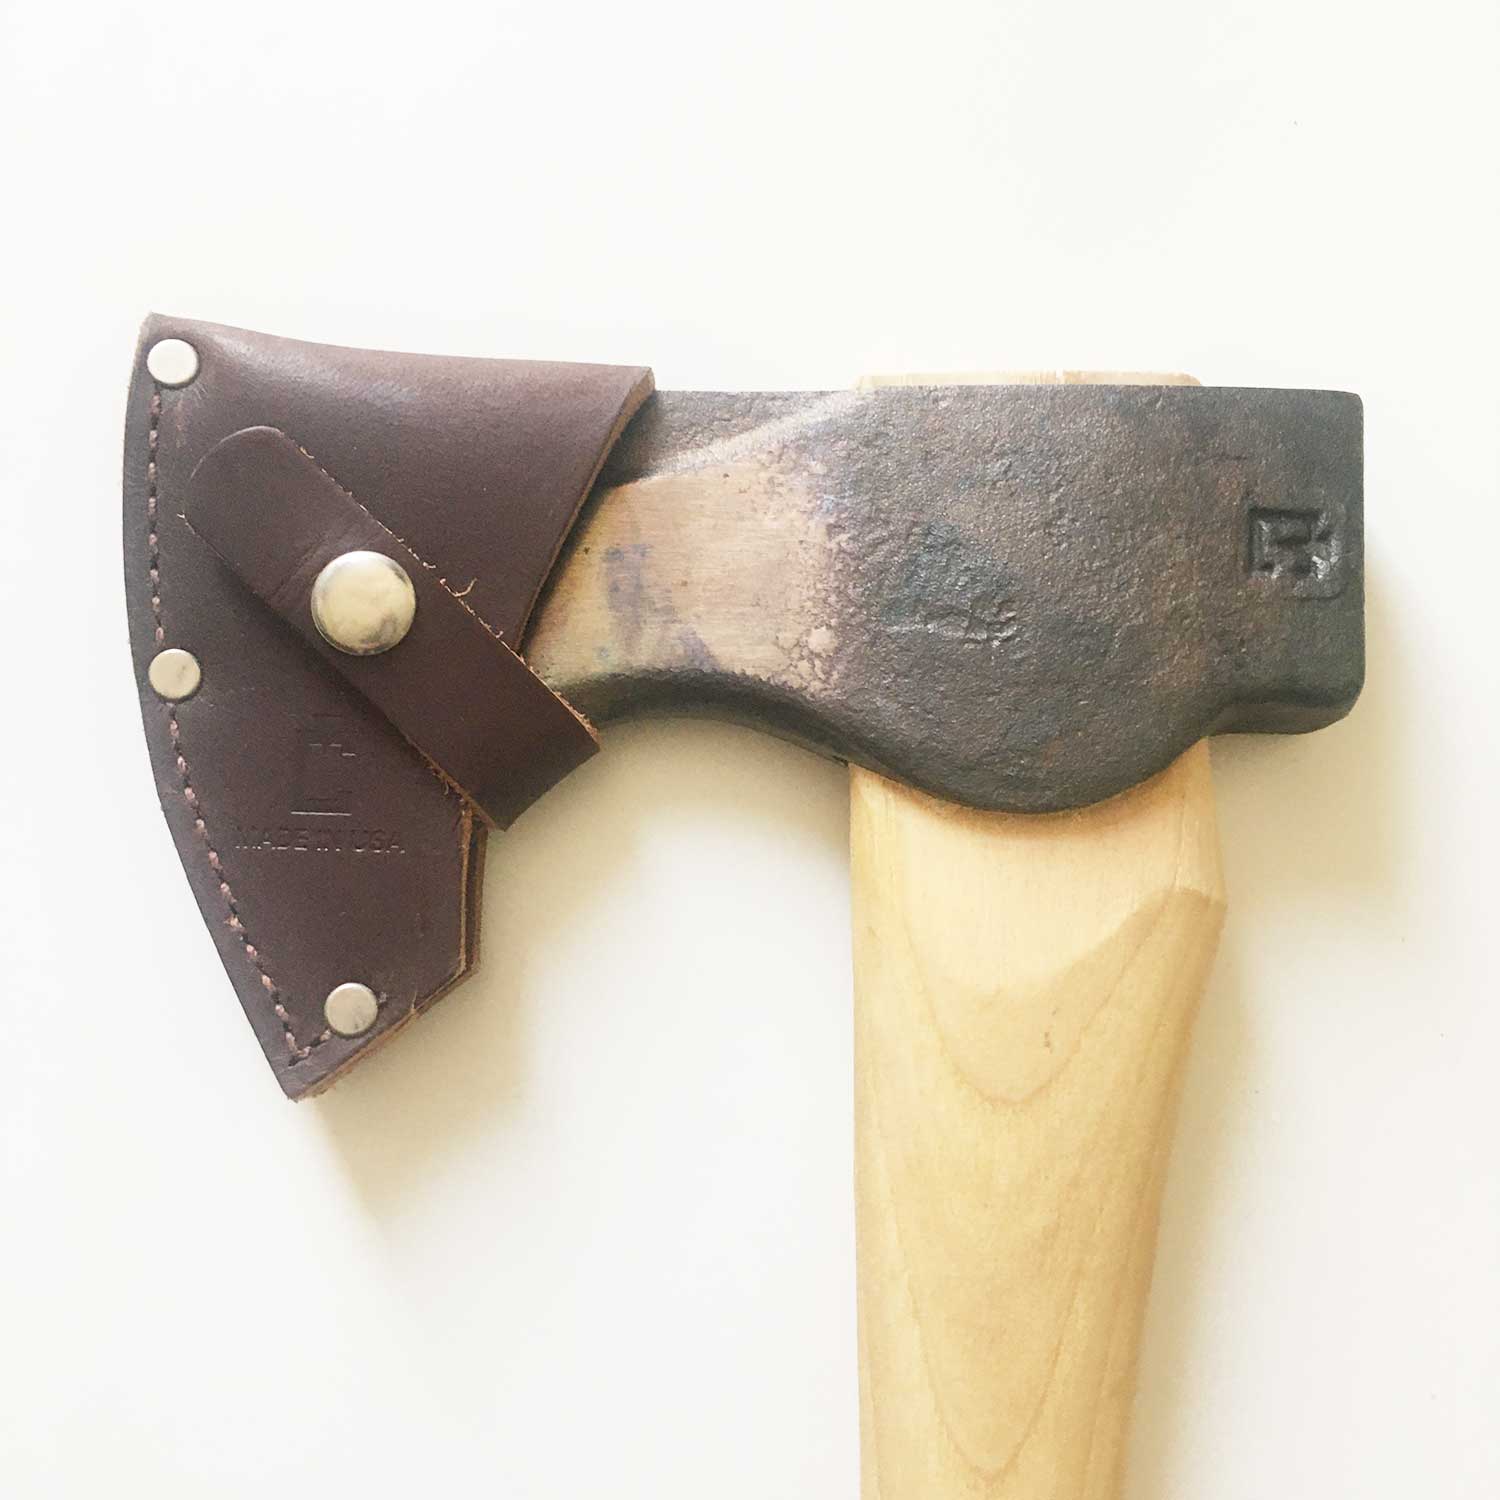 Council Tool 2 lb. Wood-Craft Pack Axe, 24 Hickory Handle, Made in The USA!